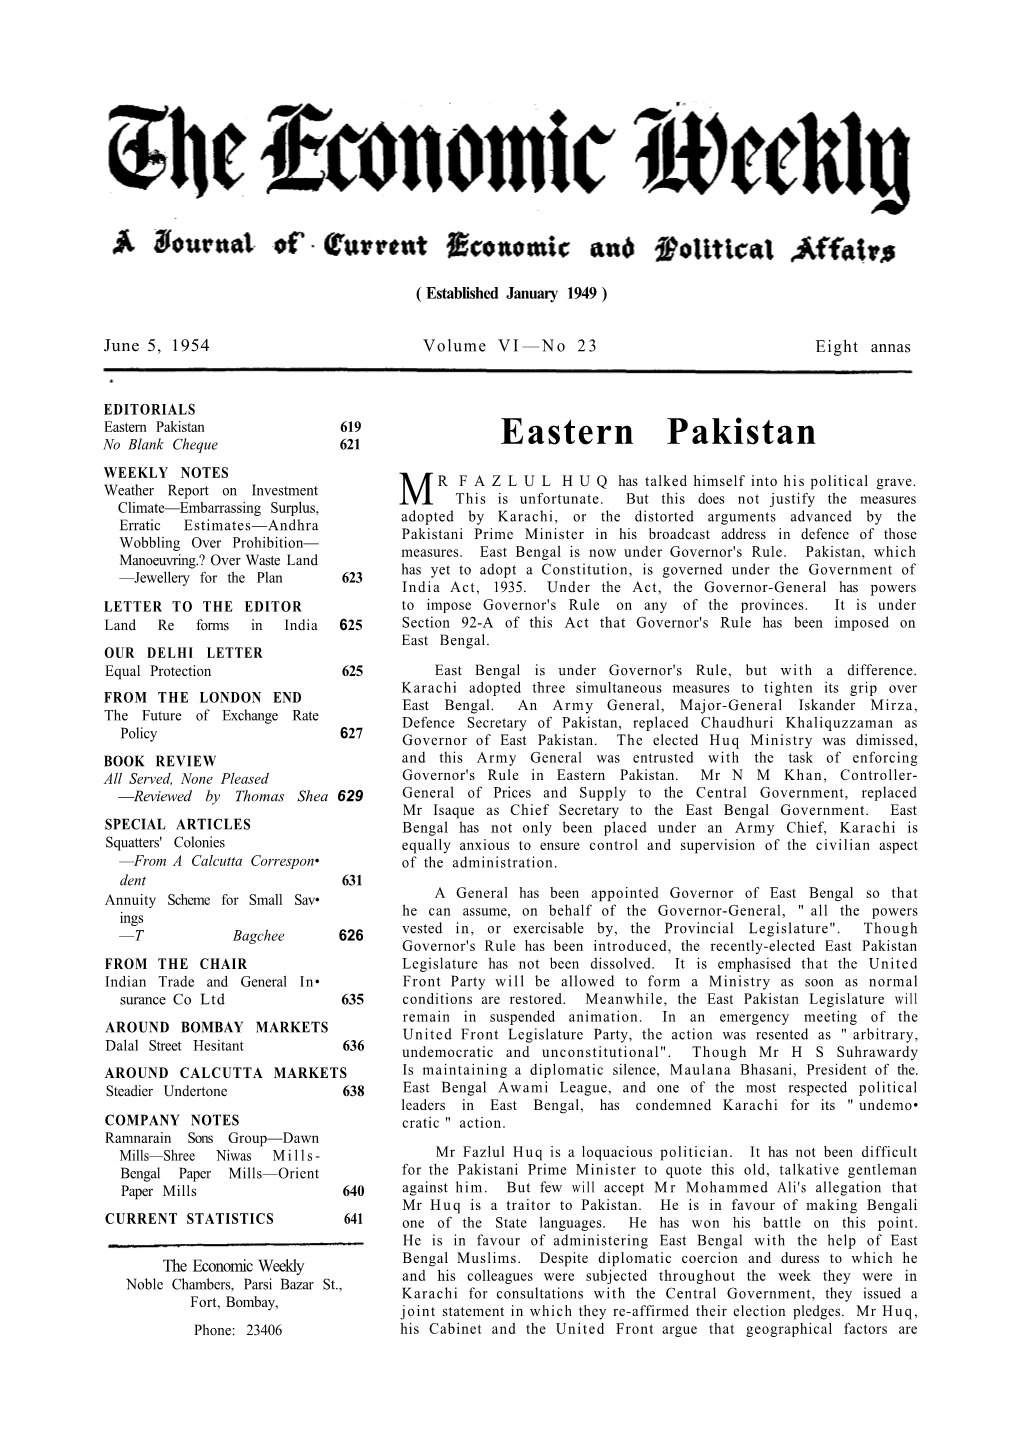 Eastern Pakistan 619 No Blank Cheque 621 Eastern Pakistan WEEKLY NOTES R FAZLUL HUQ Has Talked Himself Into His Political Grave